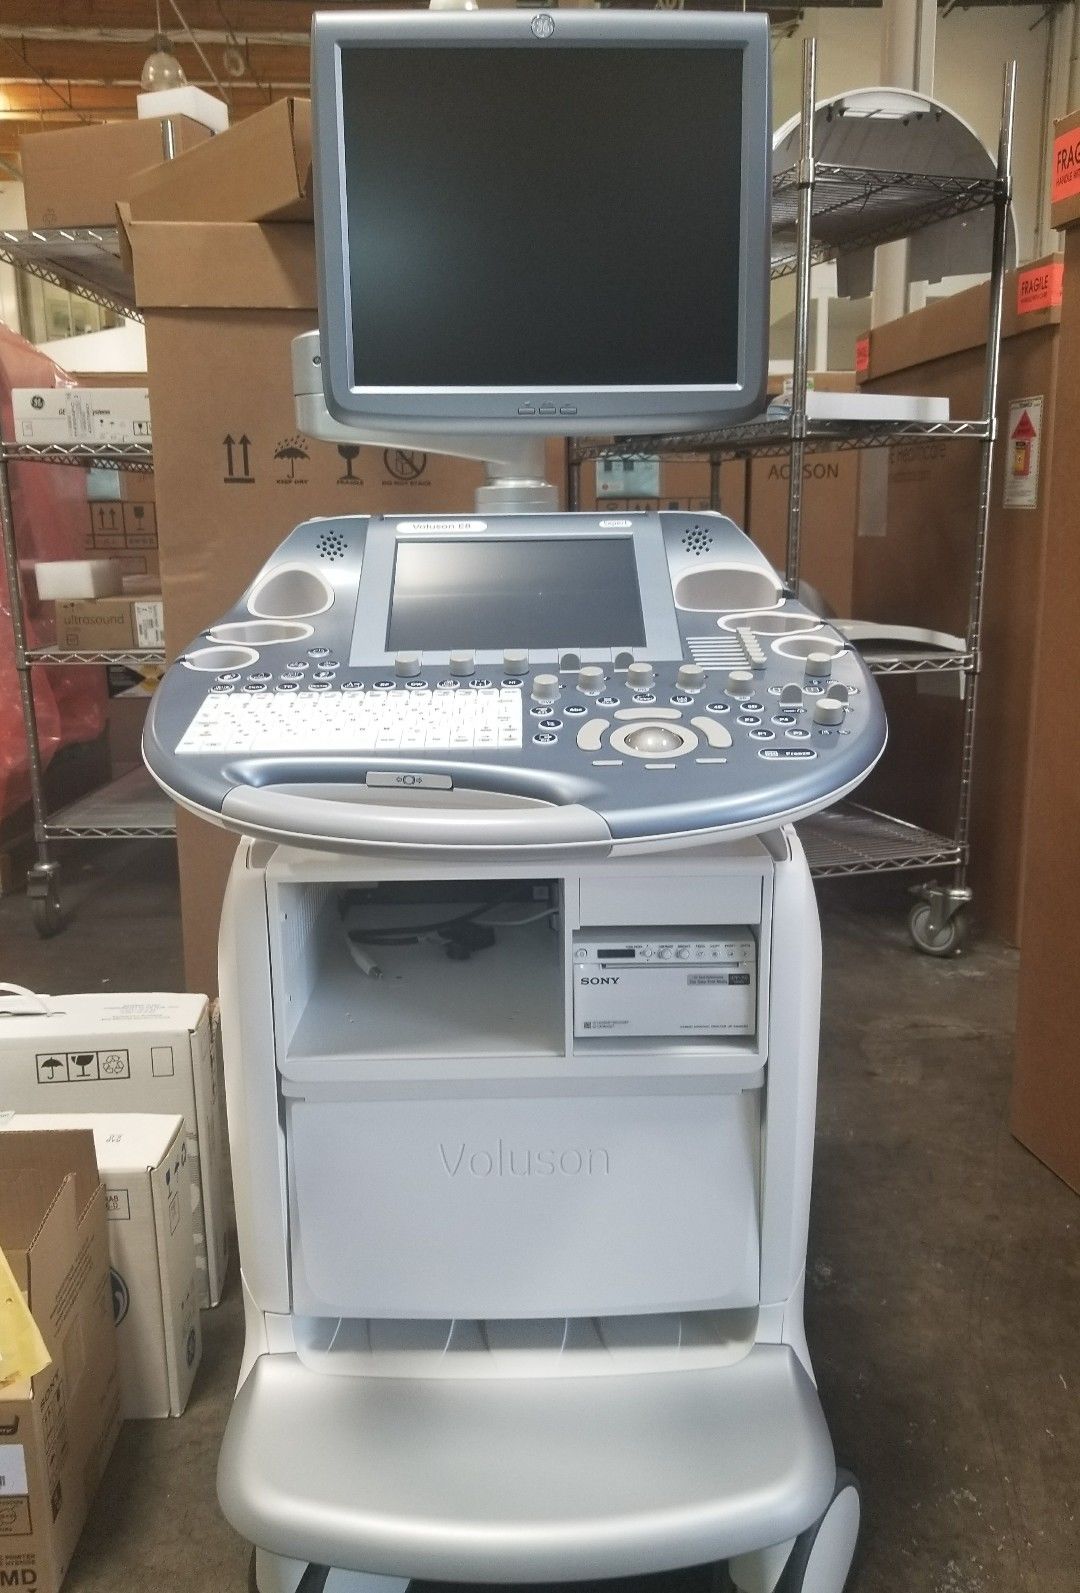 GE VOLUSON E8 BT13 - 3D/4D Imaging – Refurbished by GE 2016 with 5 demo Probes DIAGNOSTIC ULTRASOUND MACHINES FOR SALE